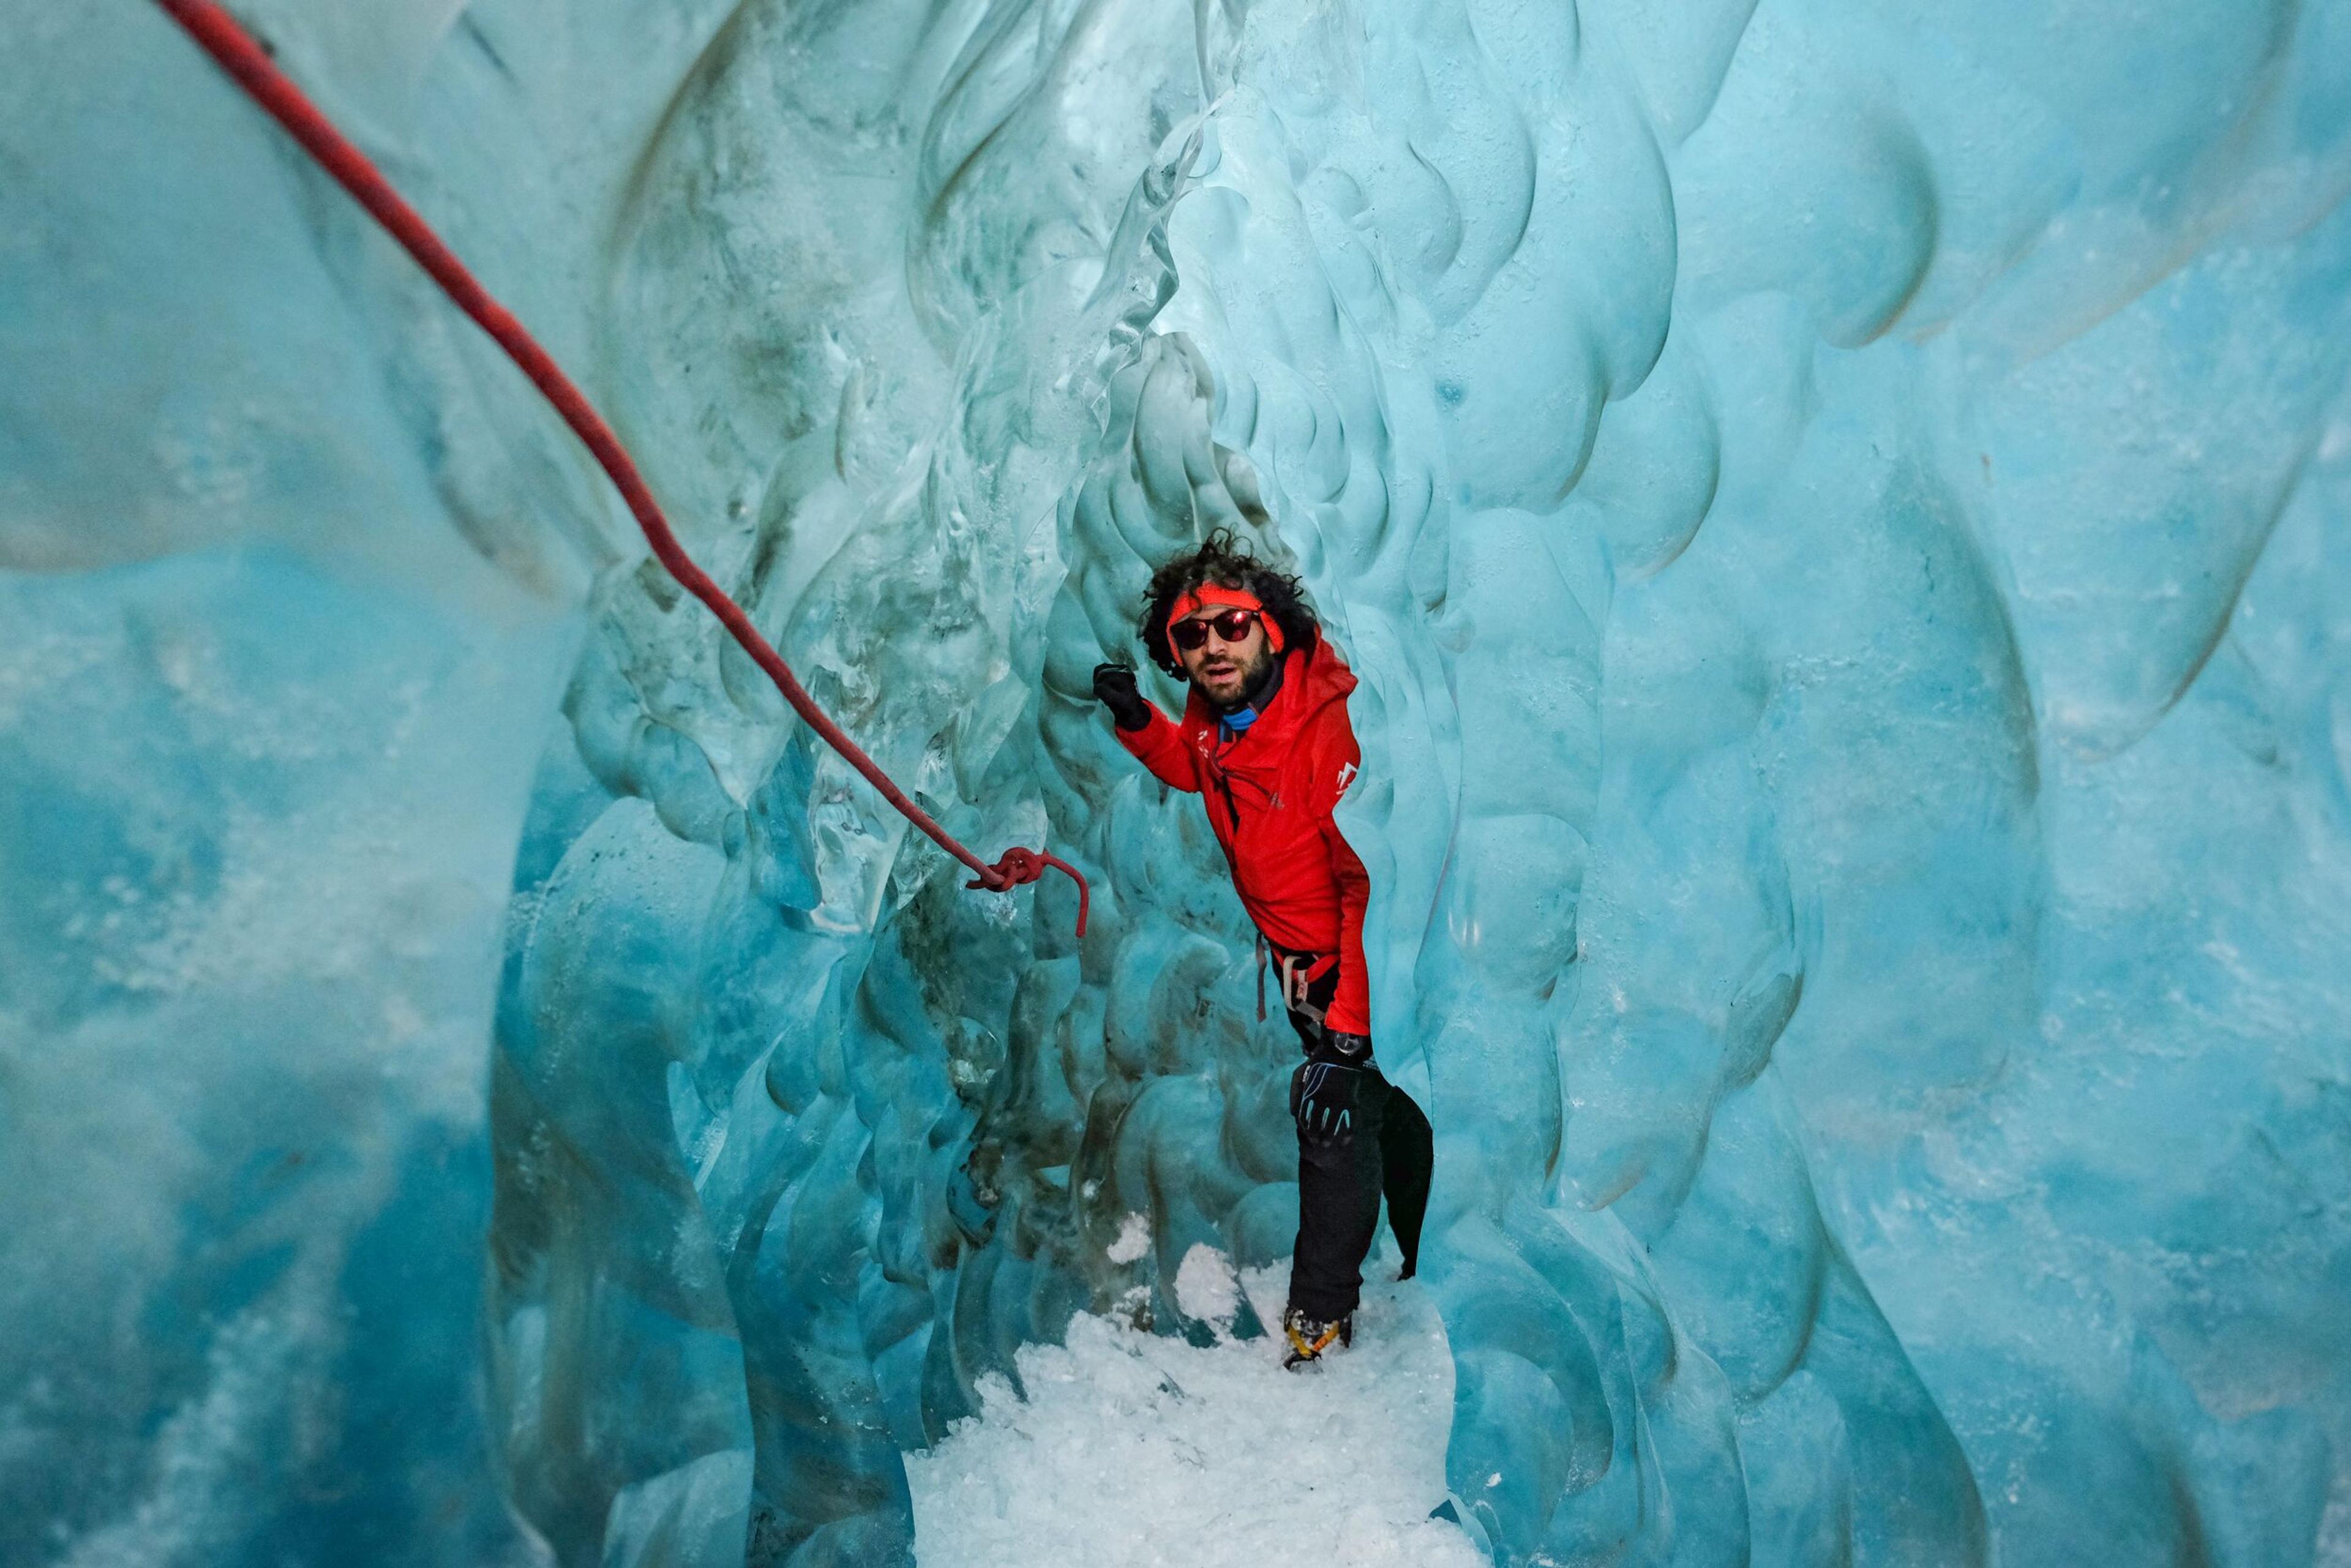 Man standing amidst the deep blue hues of an ice cave.